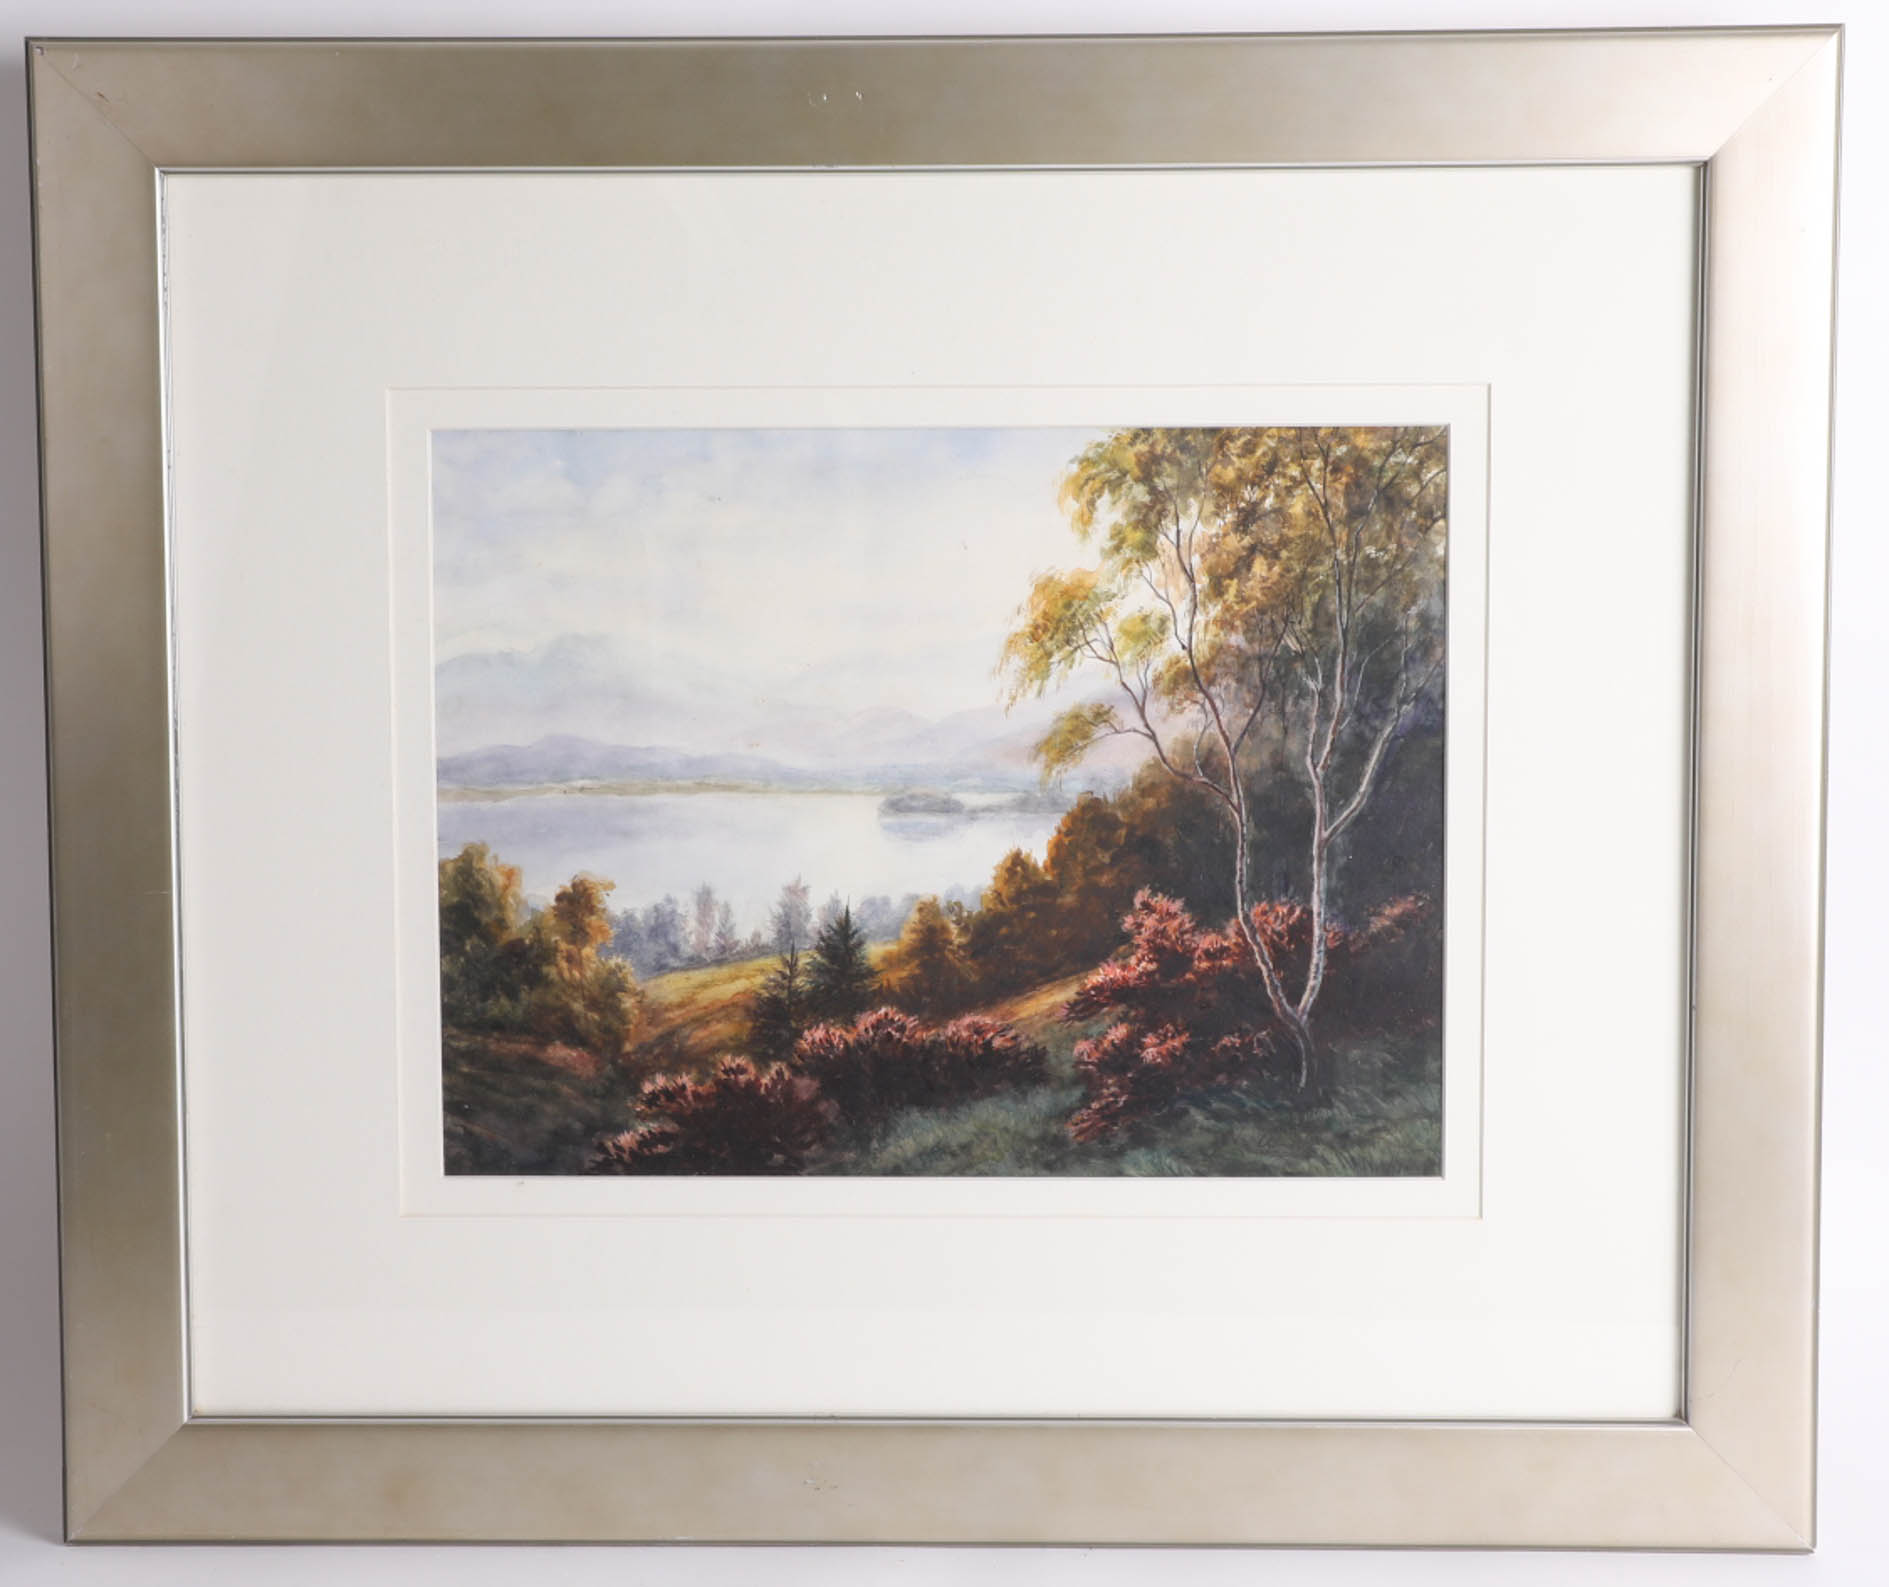 N.Williams, watercolour of a lake scene, signed, framed and glazed, 59cm x 68cm.